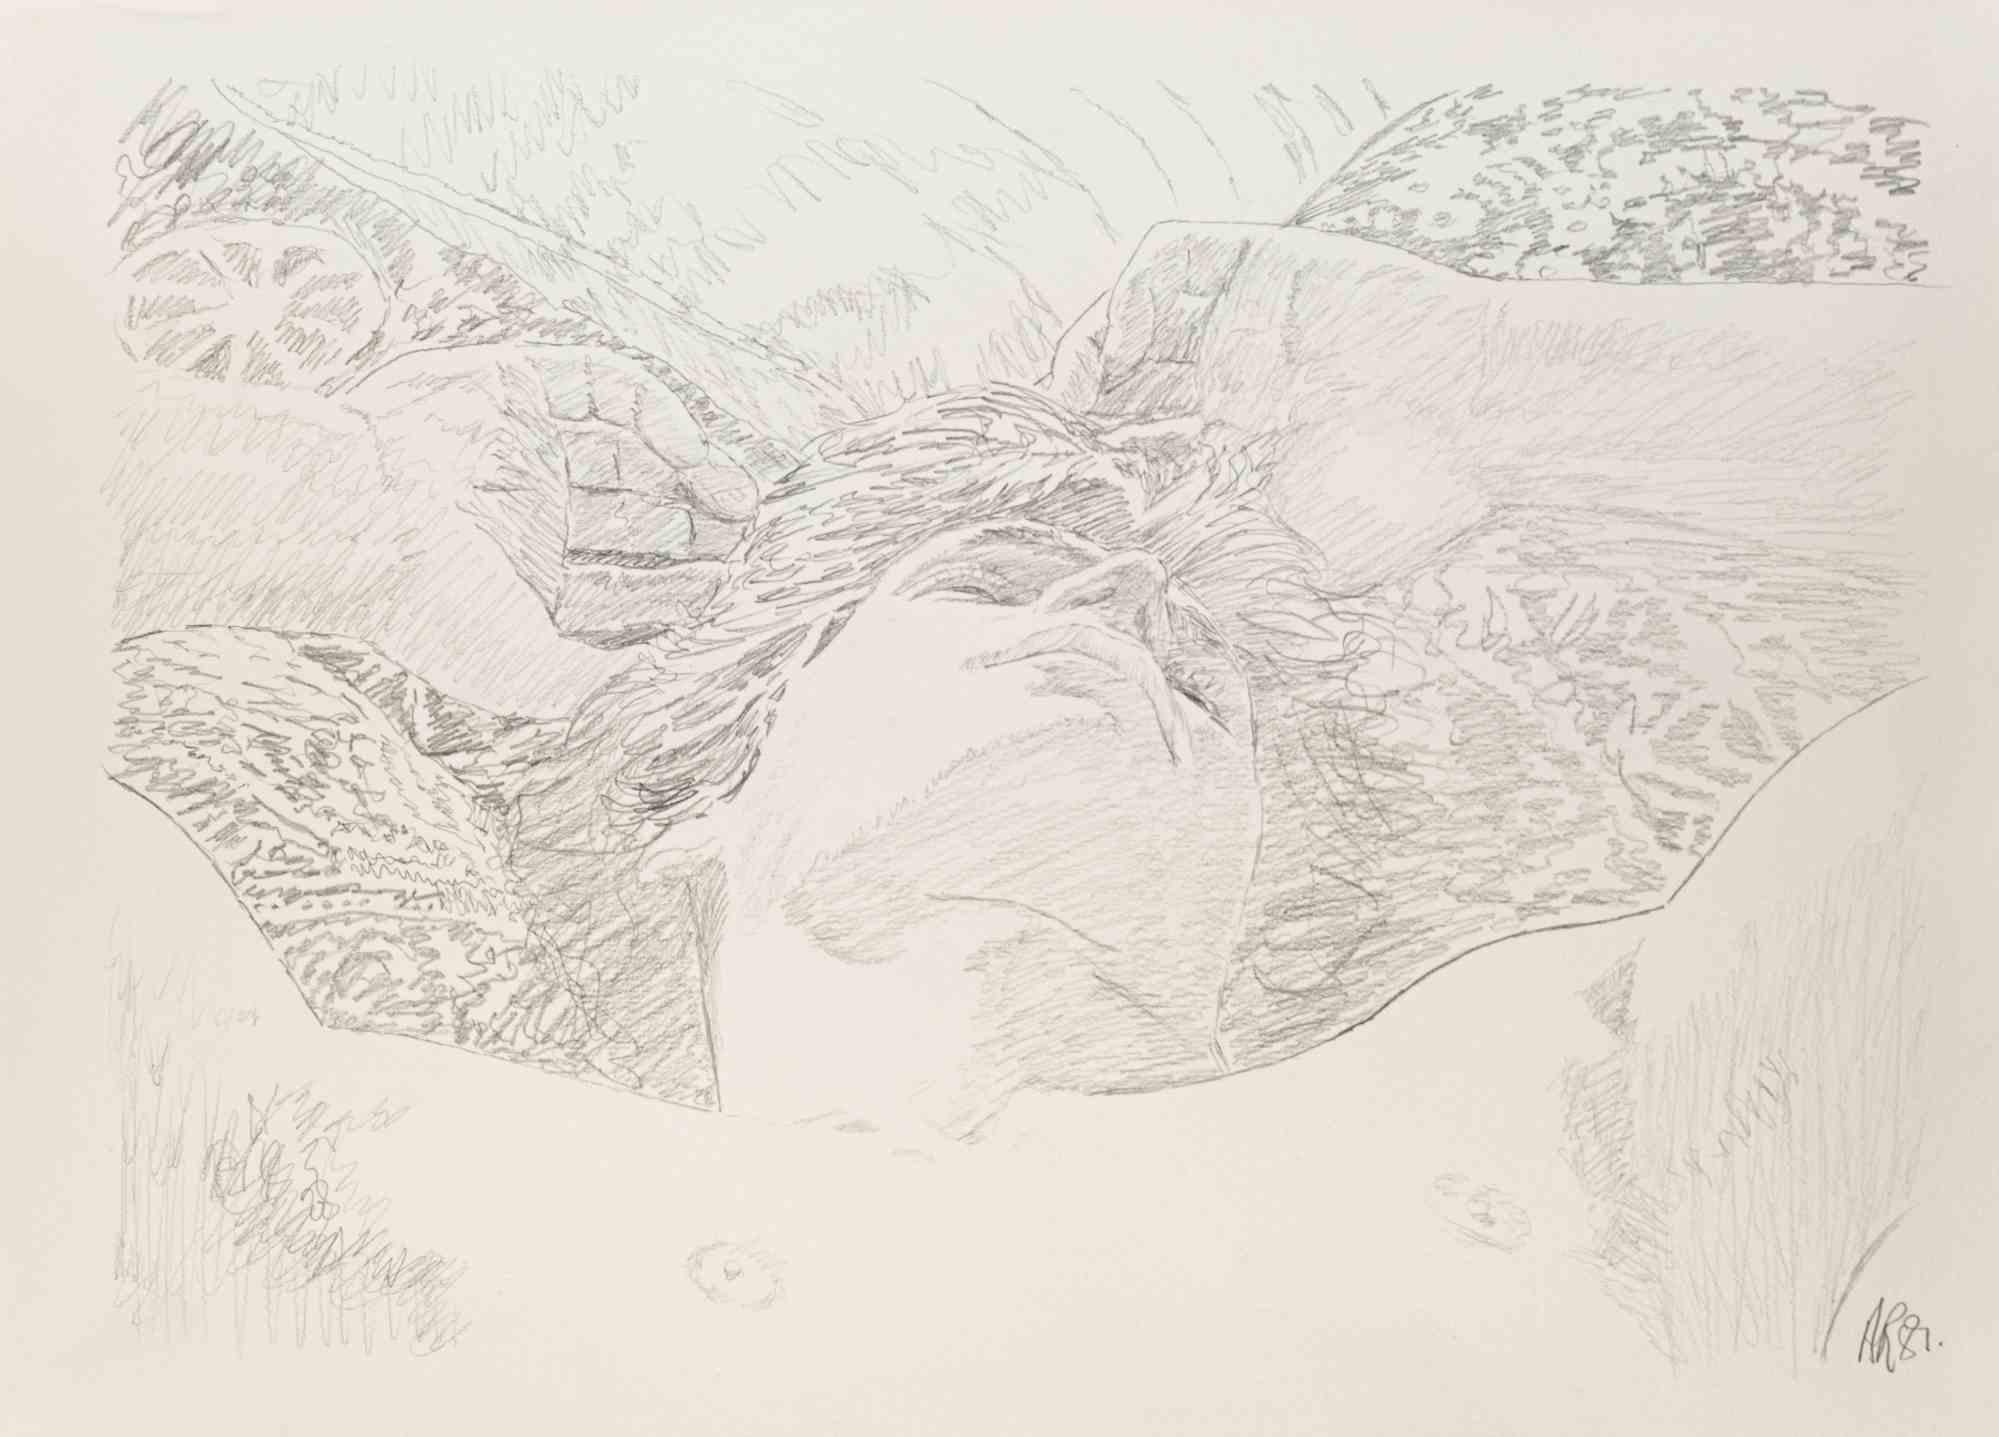 Sleeping is an original Drawing in Pencil artwork realized by Antony Roland.

Good conditions.

Hand-signed.

The artwork is depicted through soft strokes in a well-balanced composition.